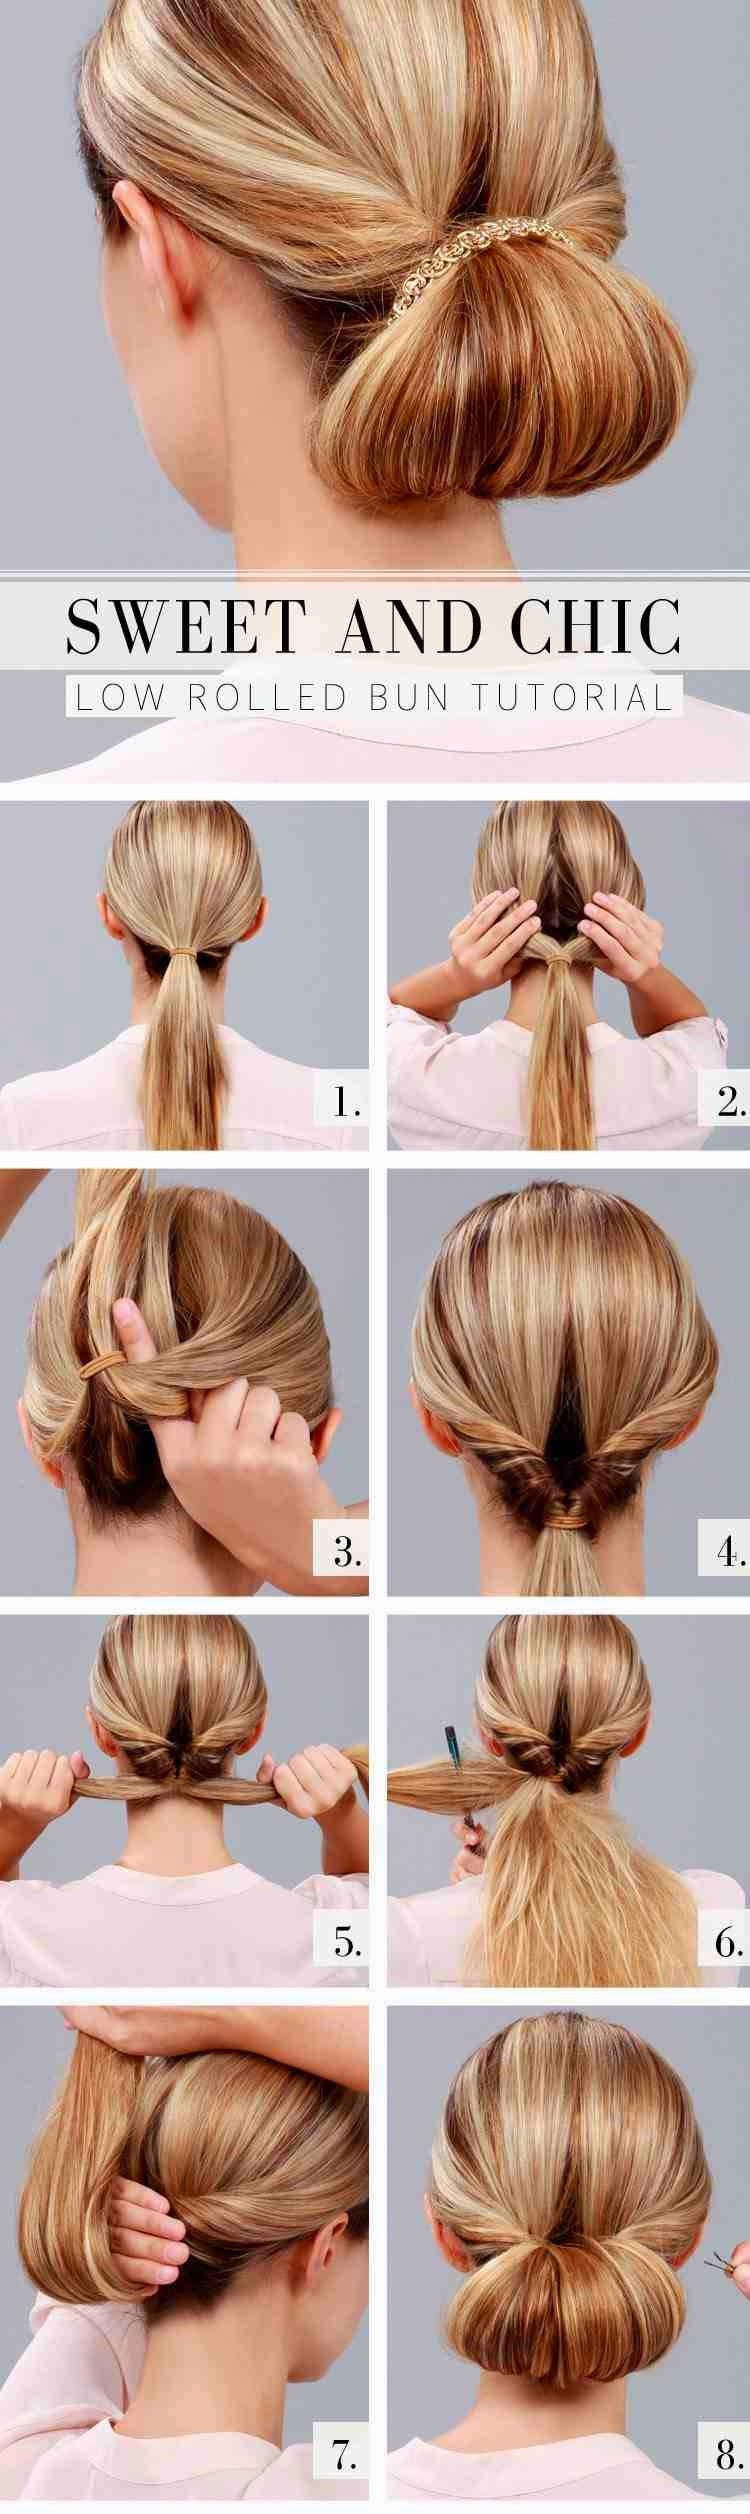 Easy 10 Minutes Hair Tutorials For Busy Mornings